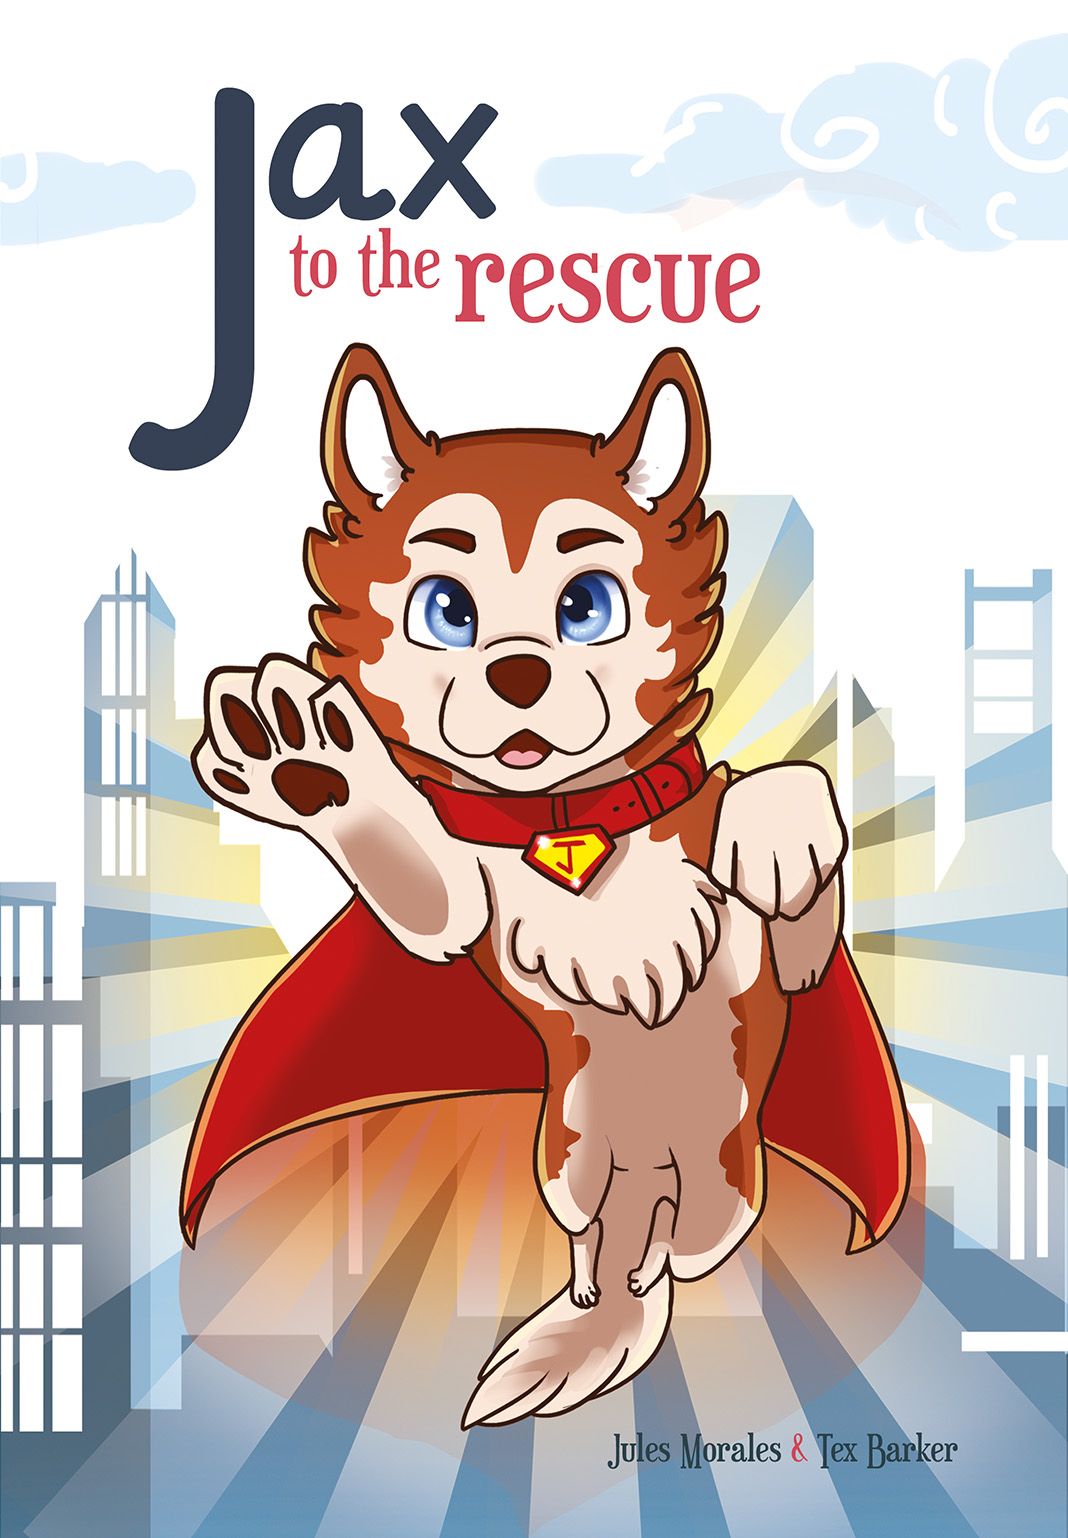 Jax To The Rescue Barker & Jules